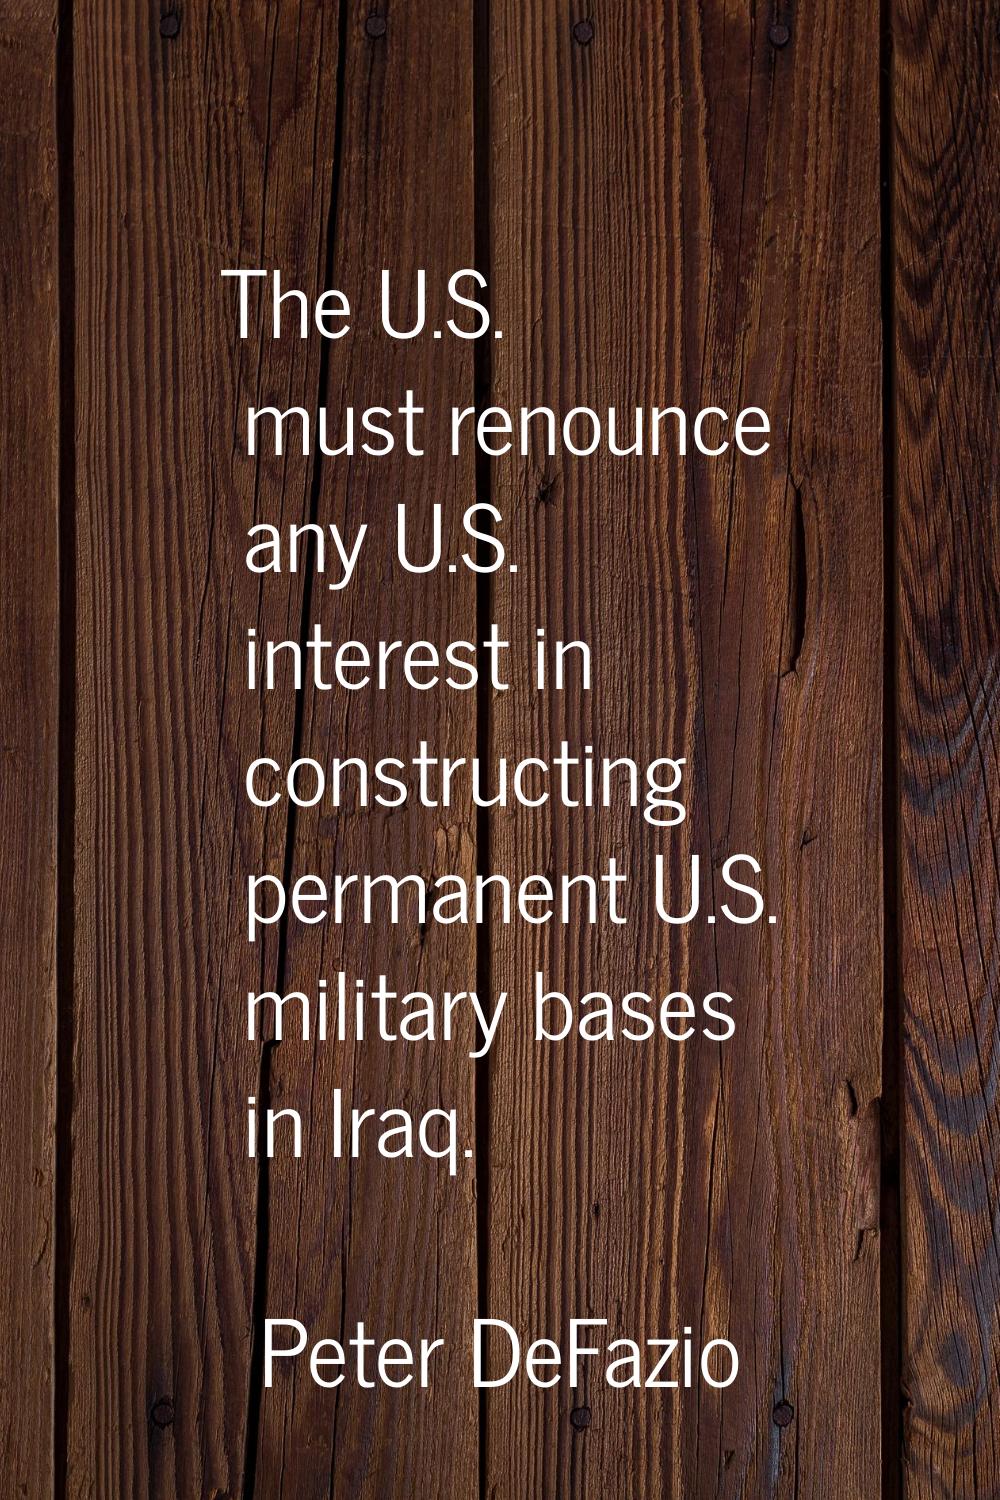 The U.S. must renounce any U.S. interest in constructing permanent U.S. military bases in Iraq.